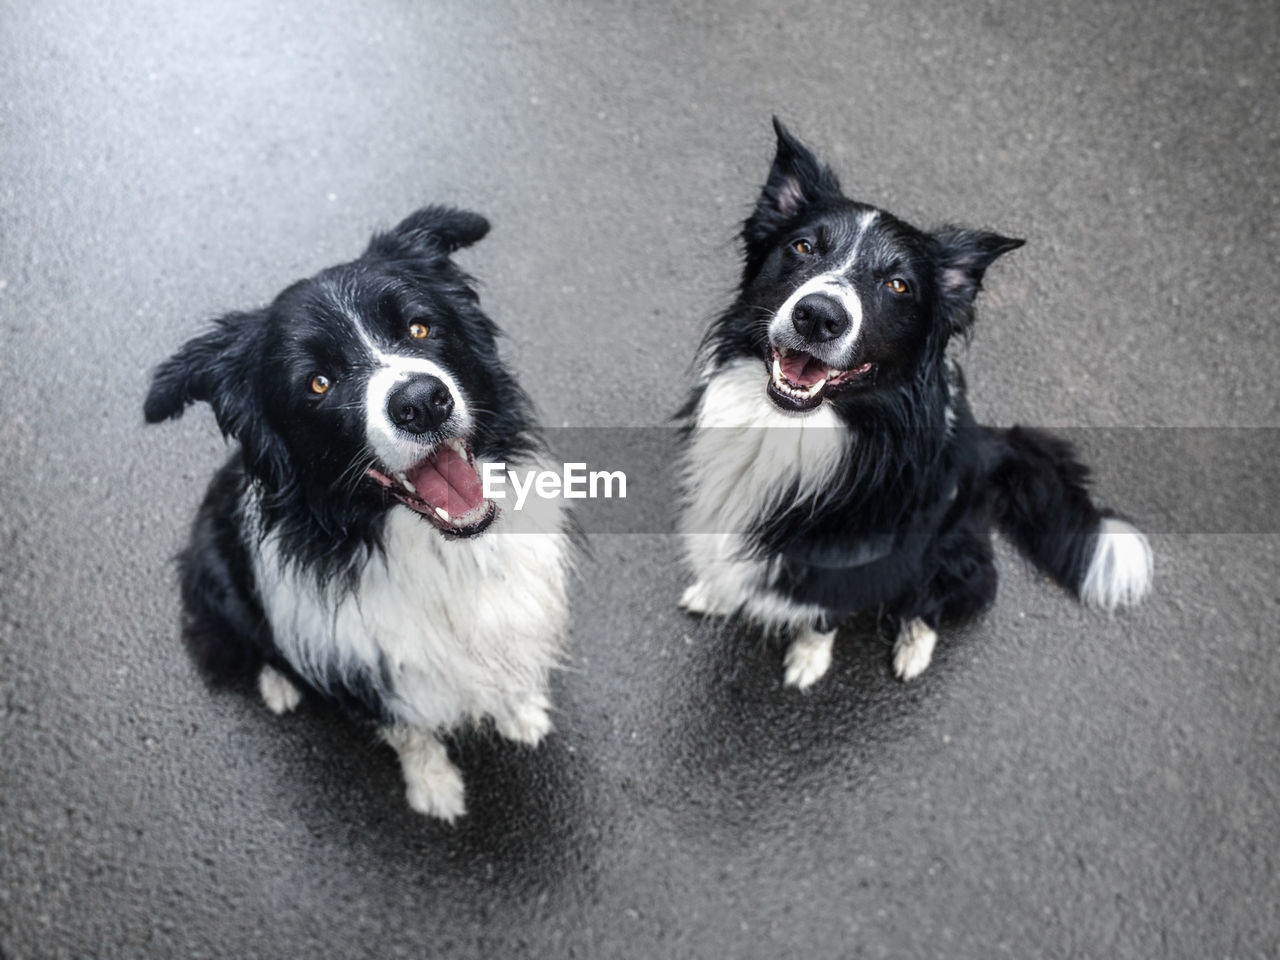 High angle portrait of border collies sitting on road